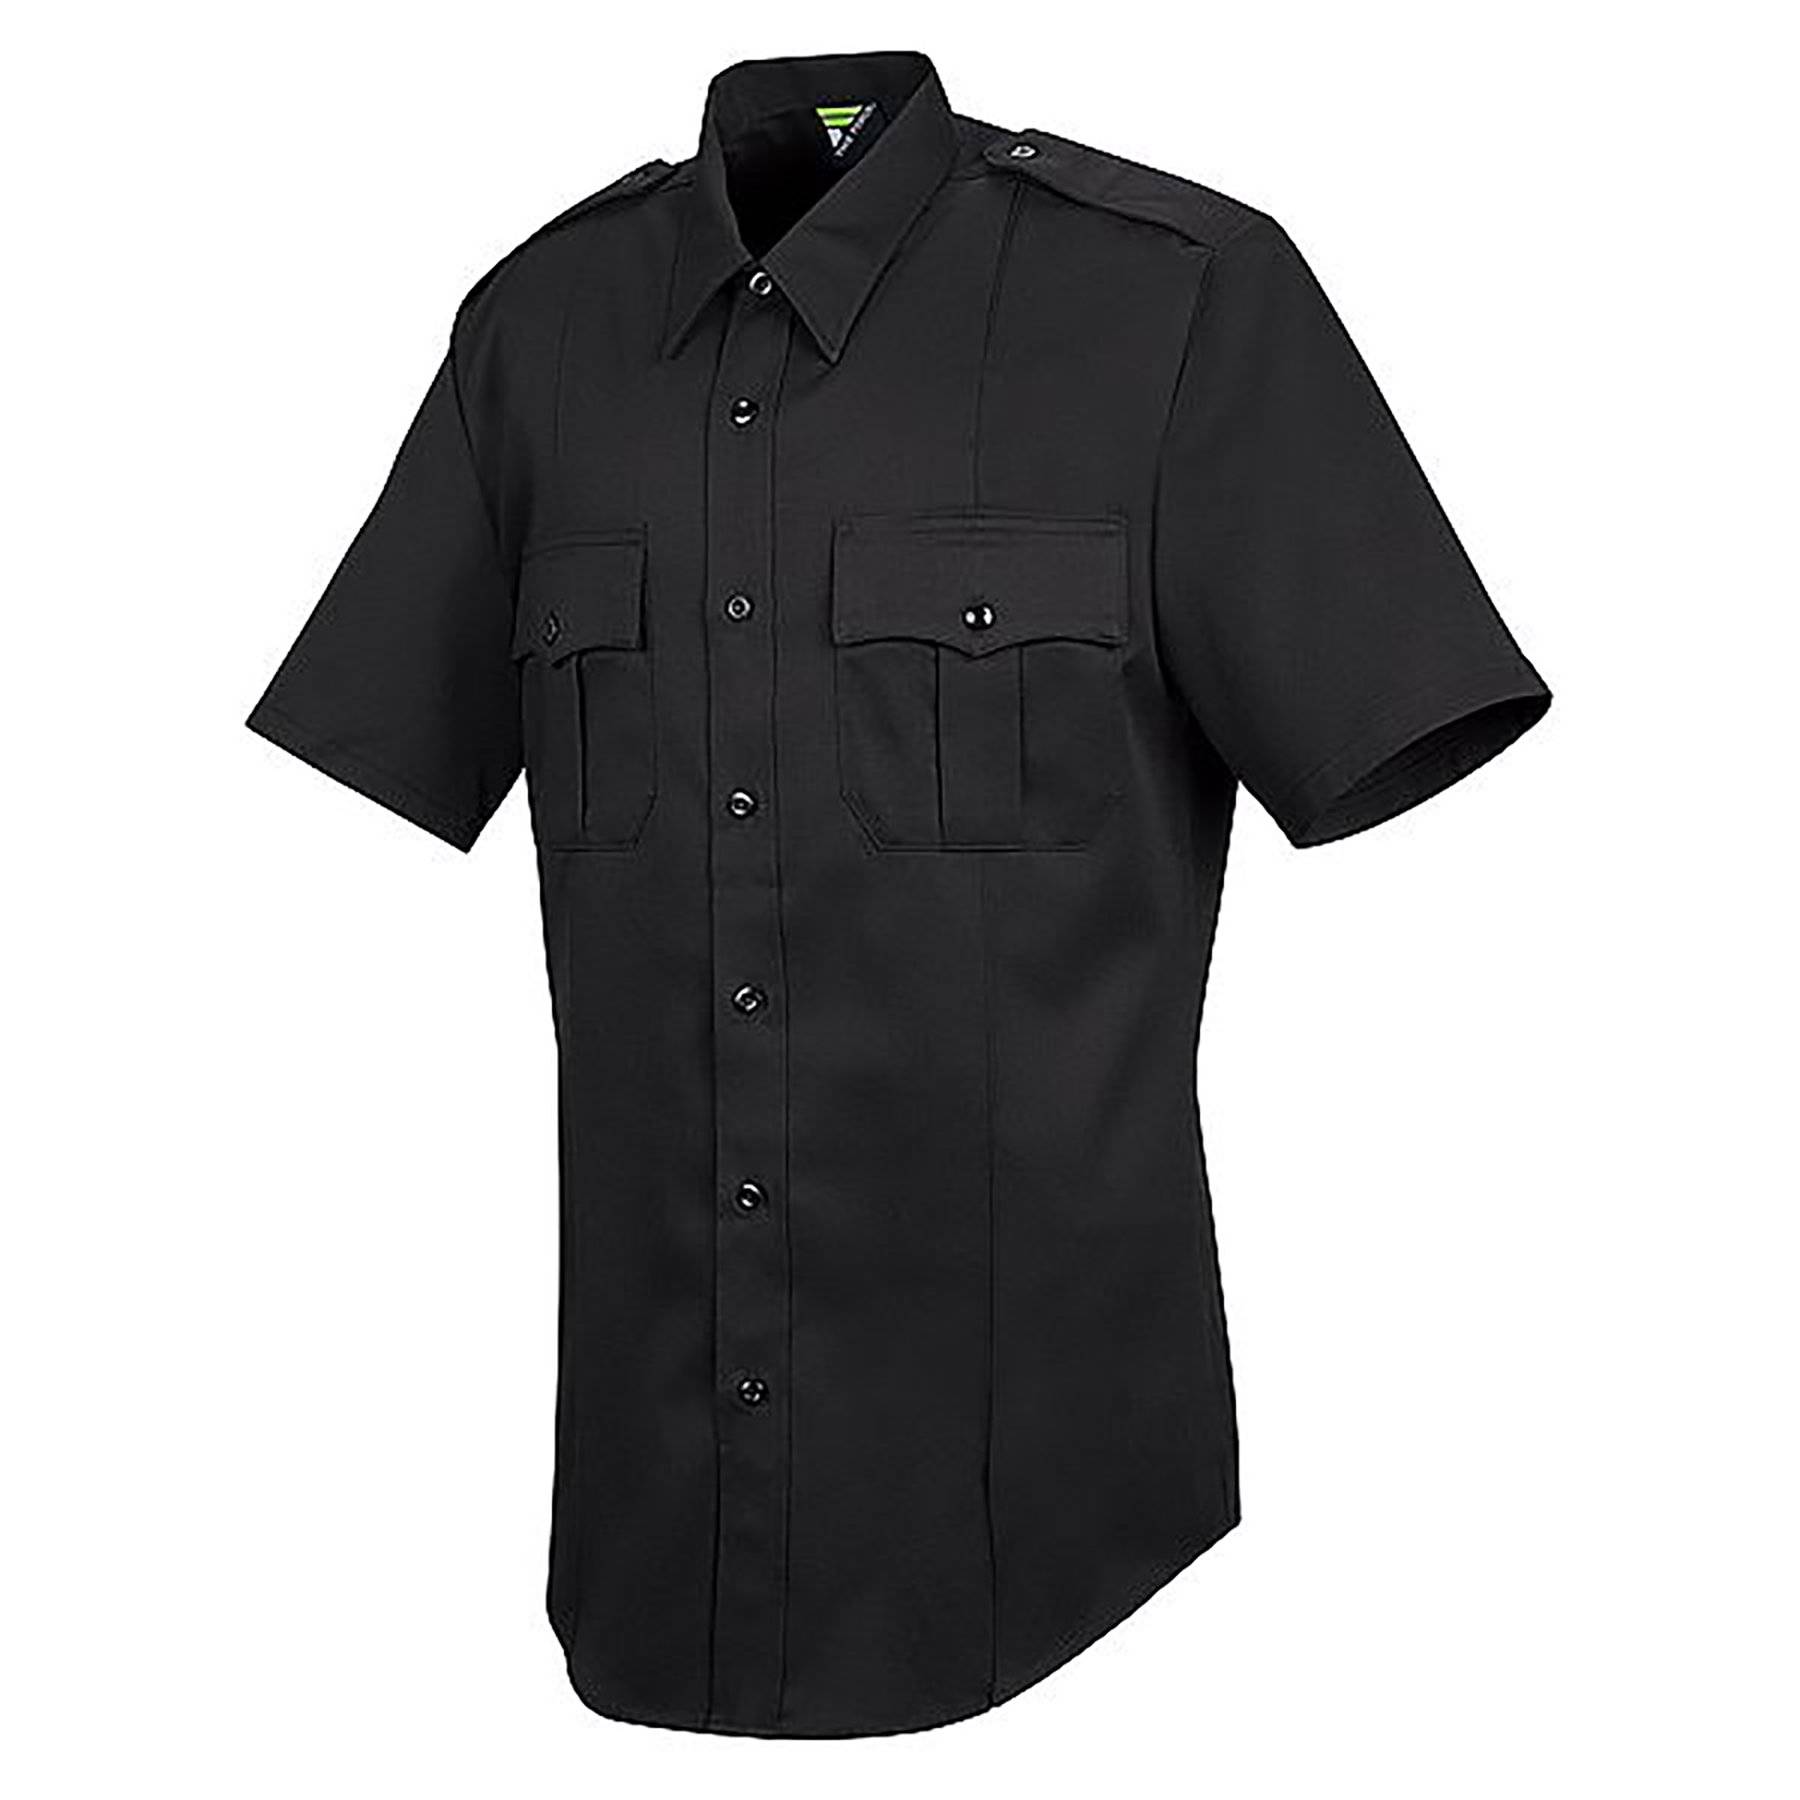 Horace Small Sentry Plus Mens Short Sleeve Shirt with Zipper